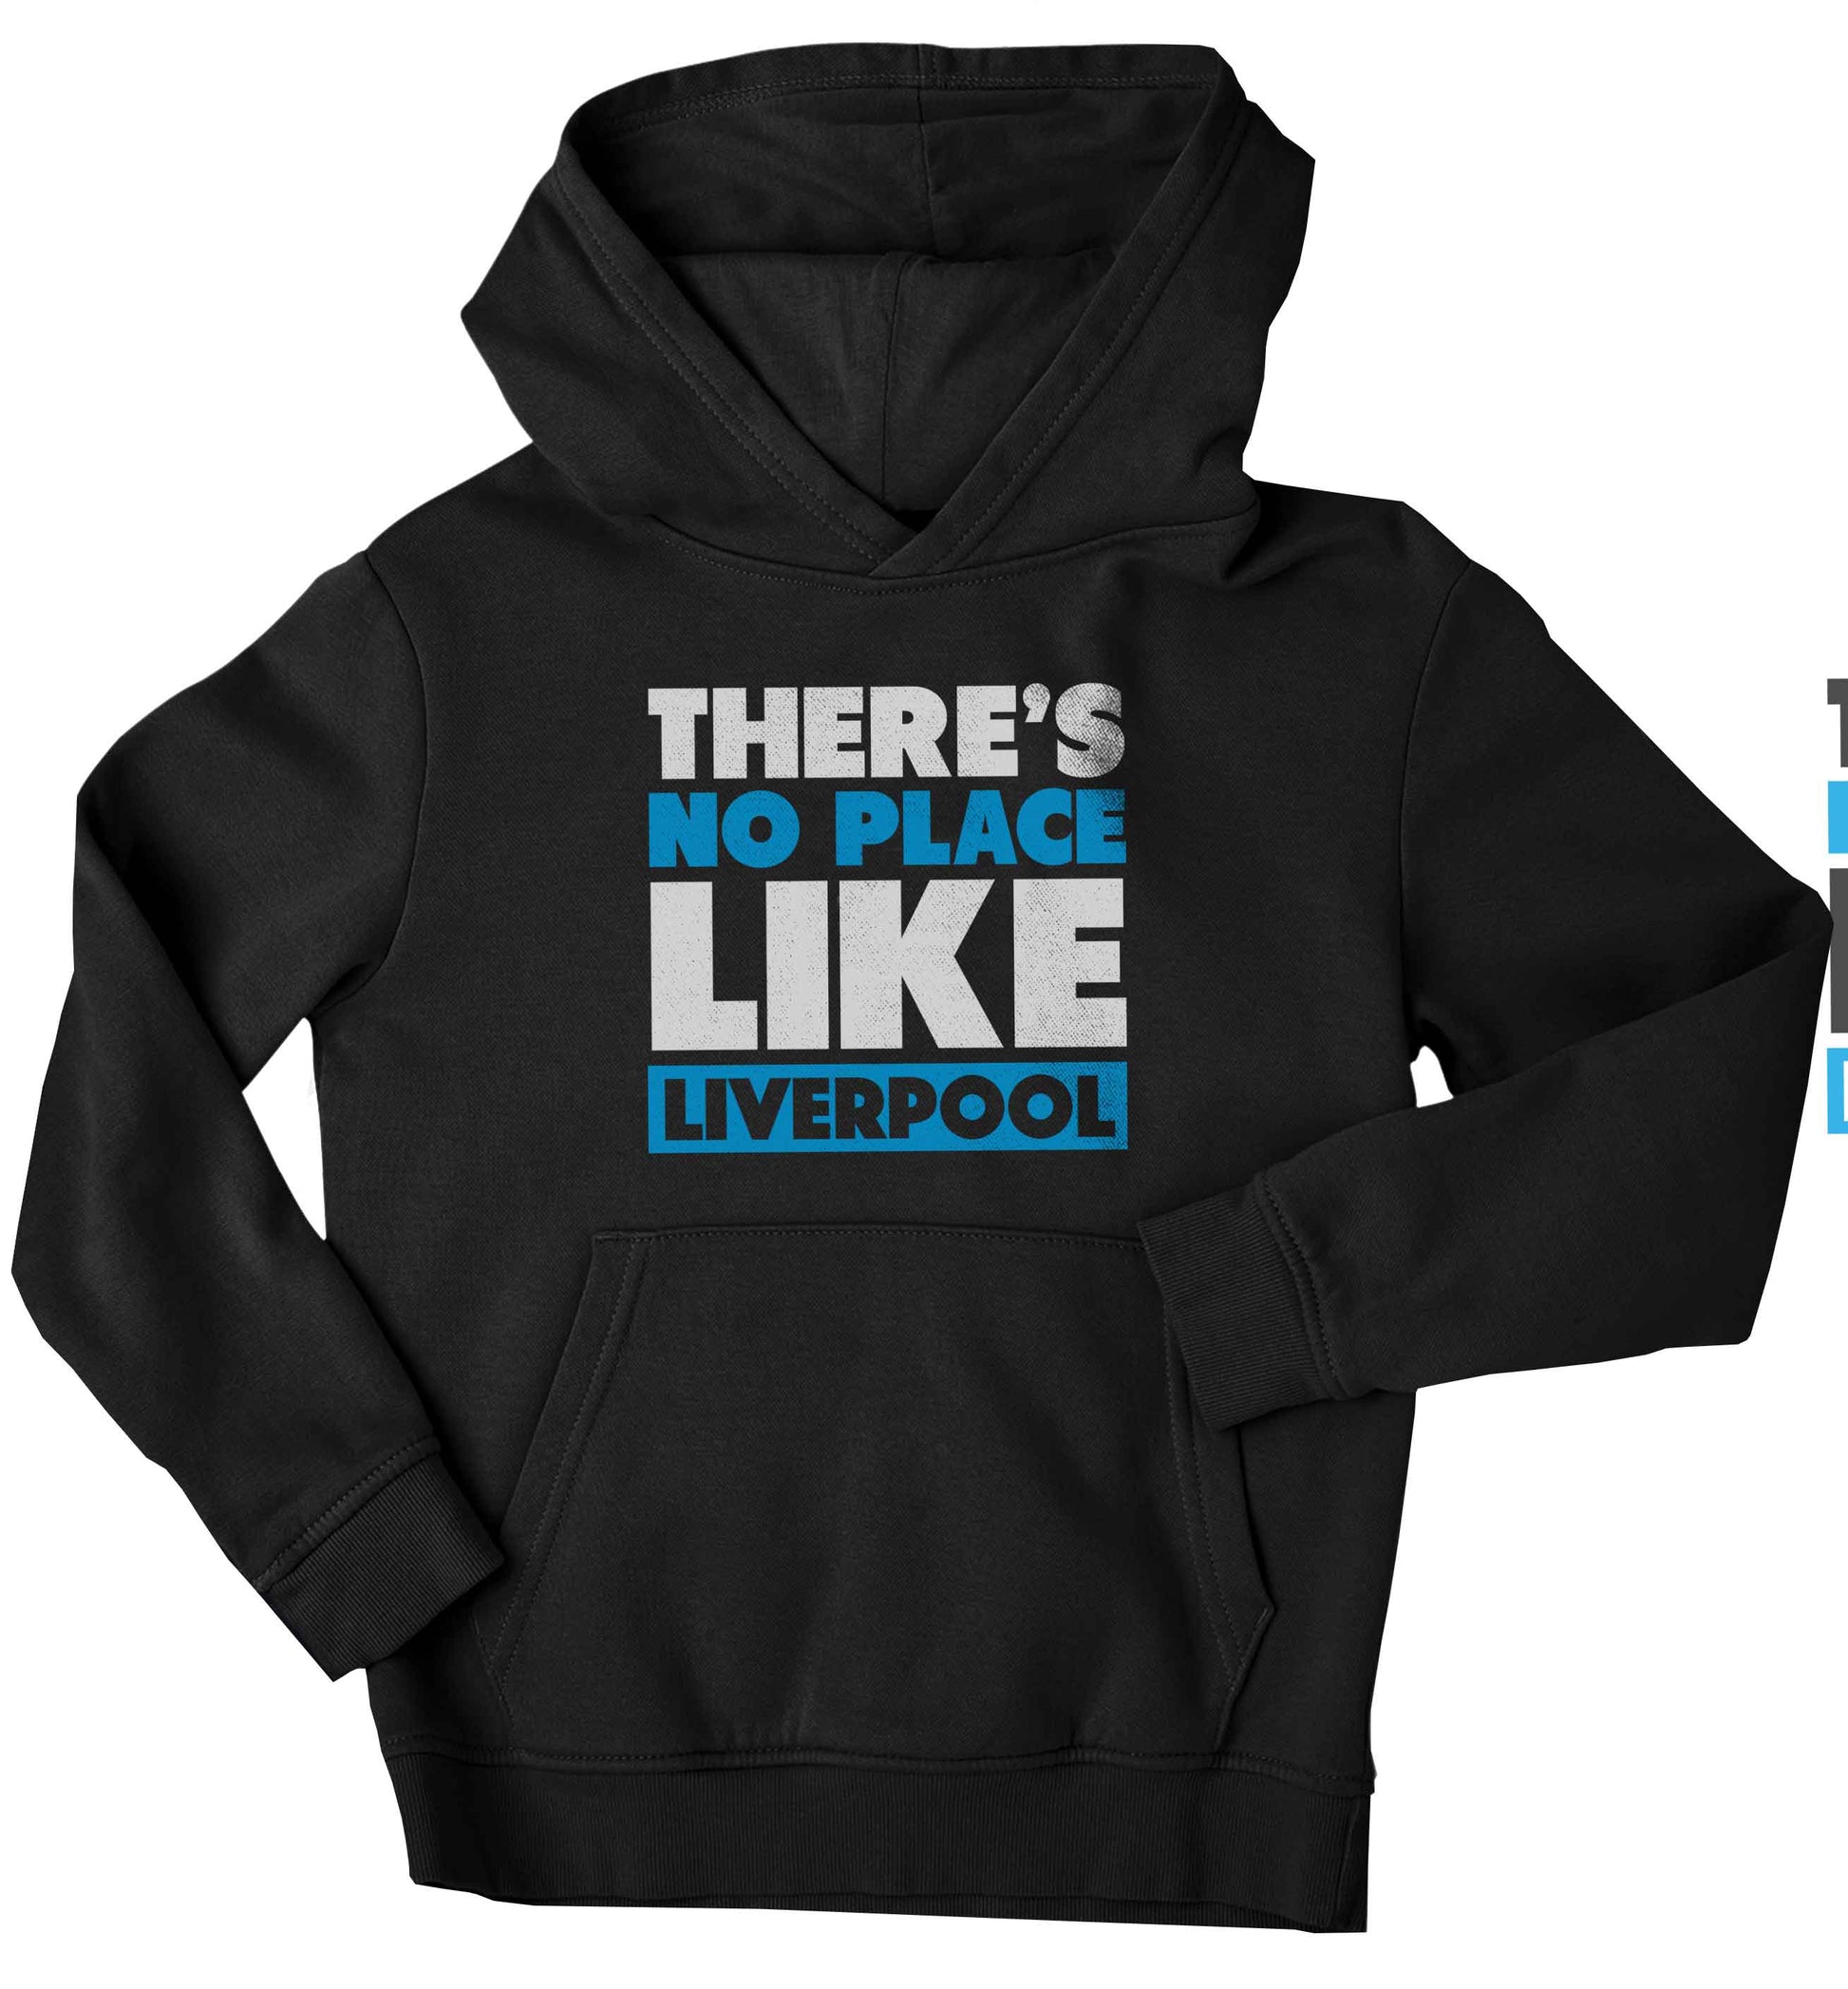 There's no place like Liverpool children's black hoodie 12-13 Years